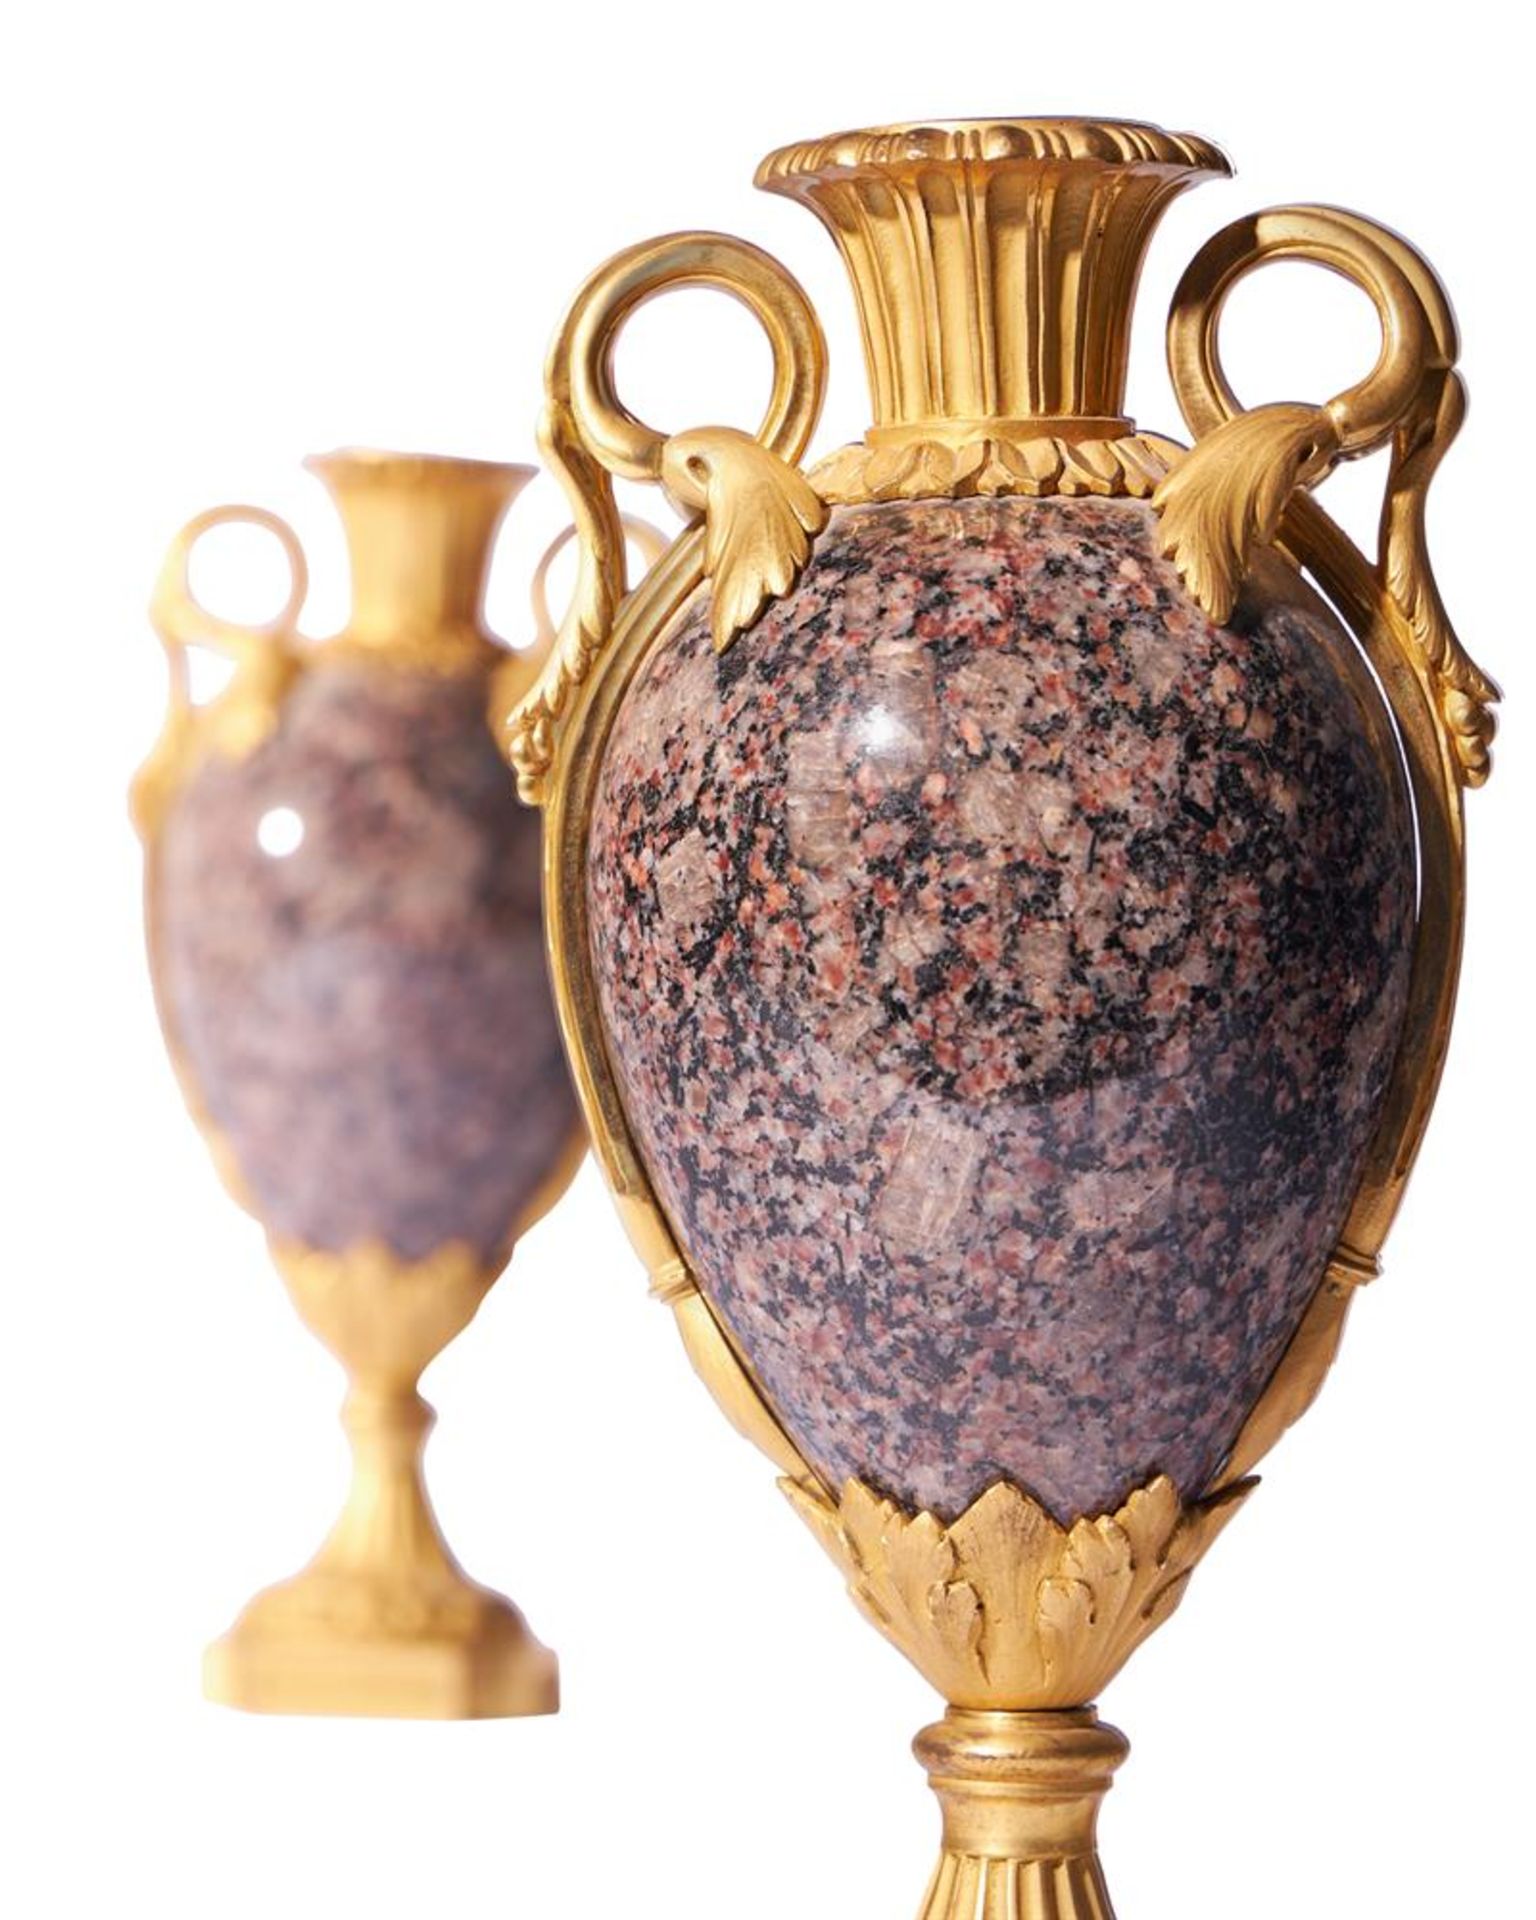 A PAIR OF GILT ORMOLU MOUNTED GRANITE VASES IN THE LOUIS XVI STYLE, FRENCH - Image 4 of 4